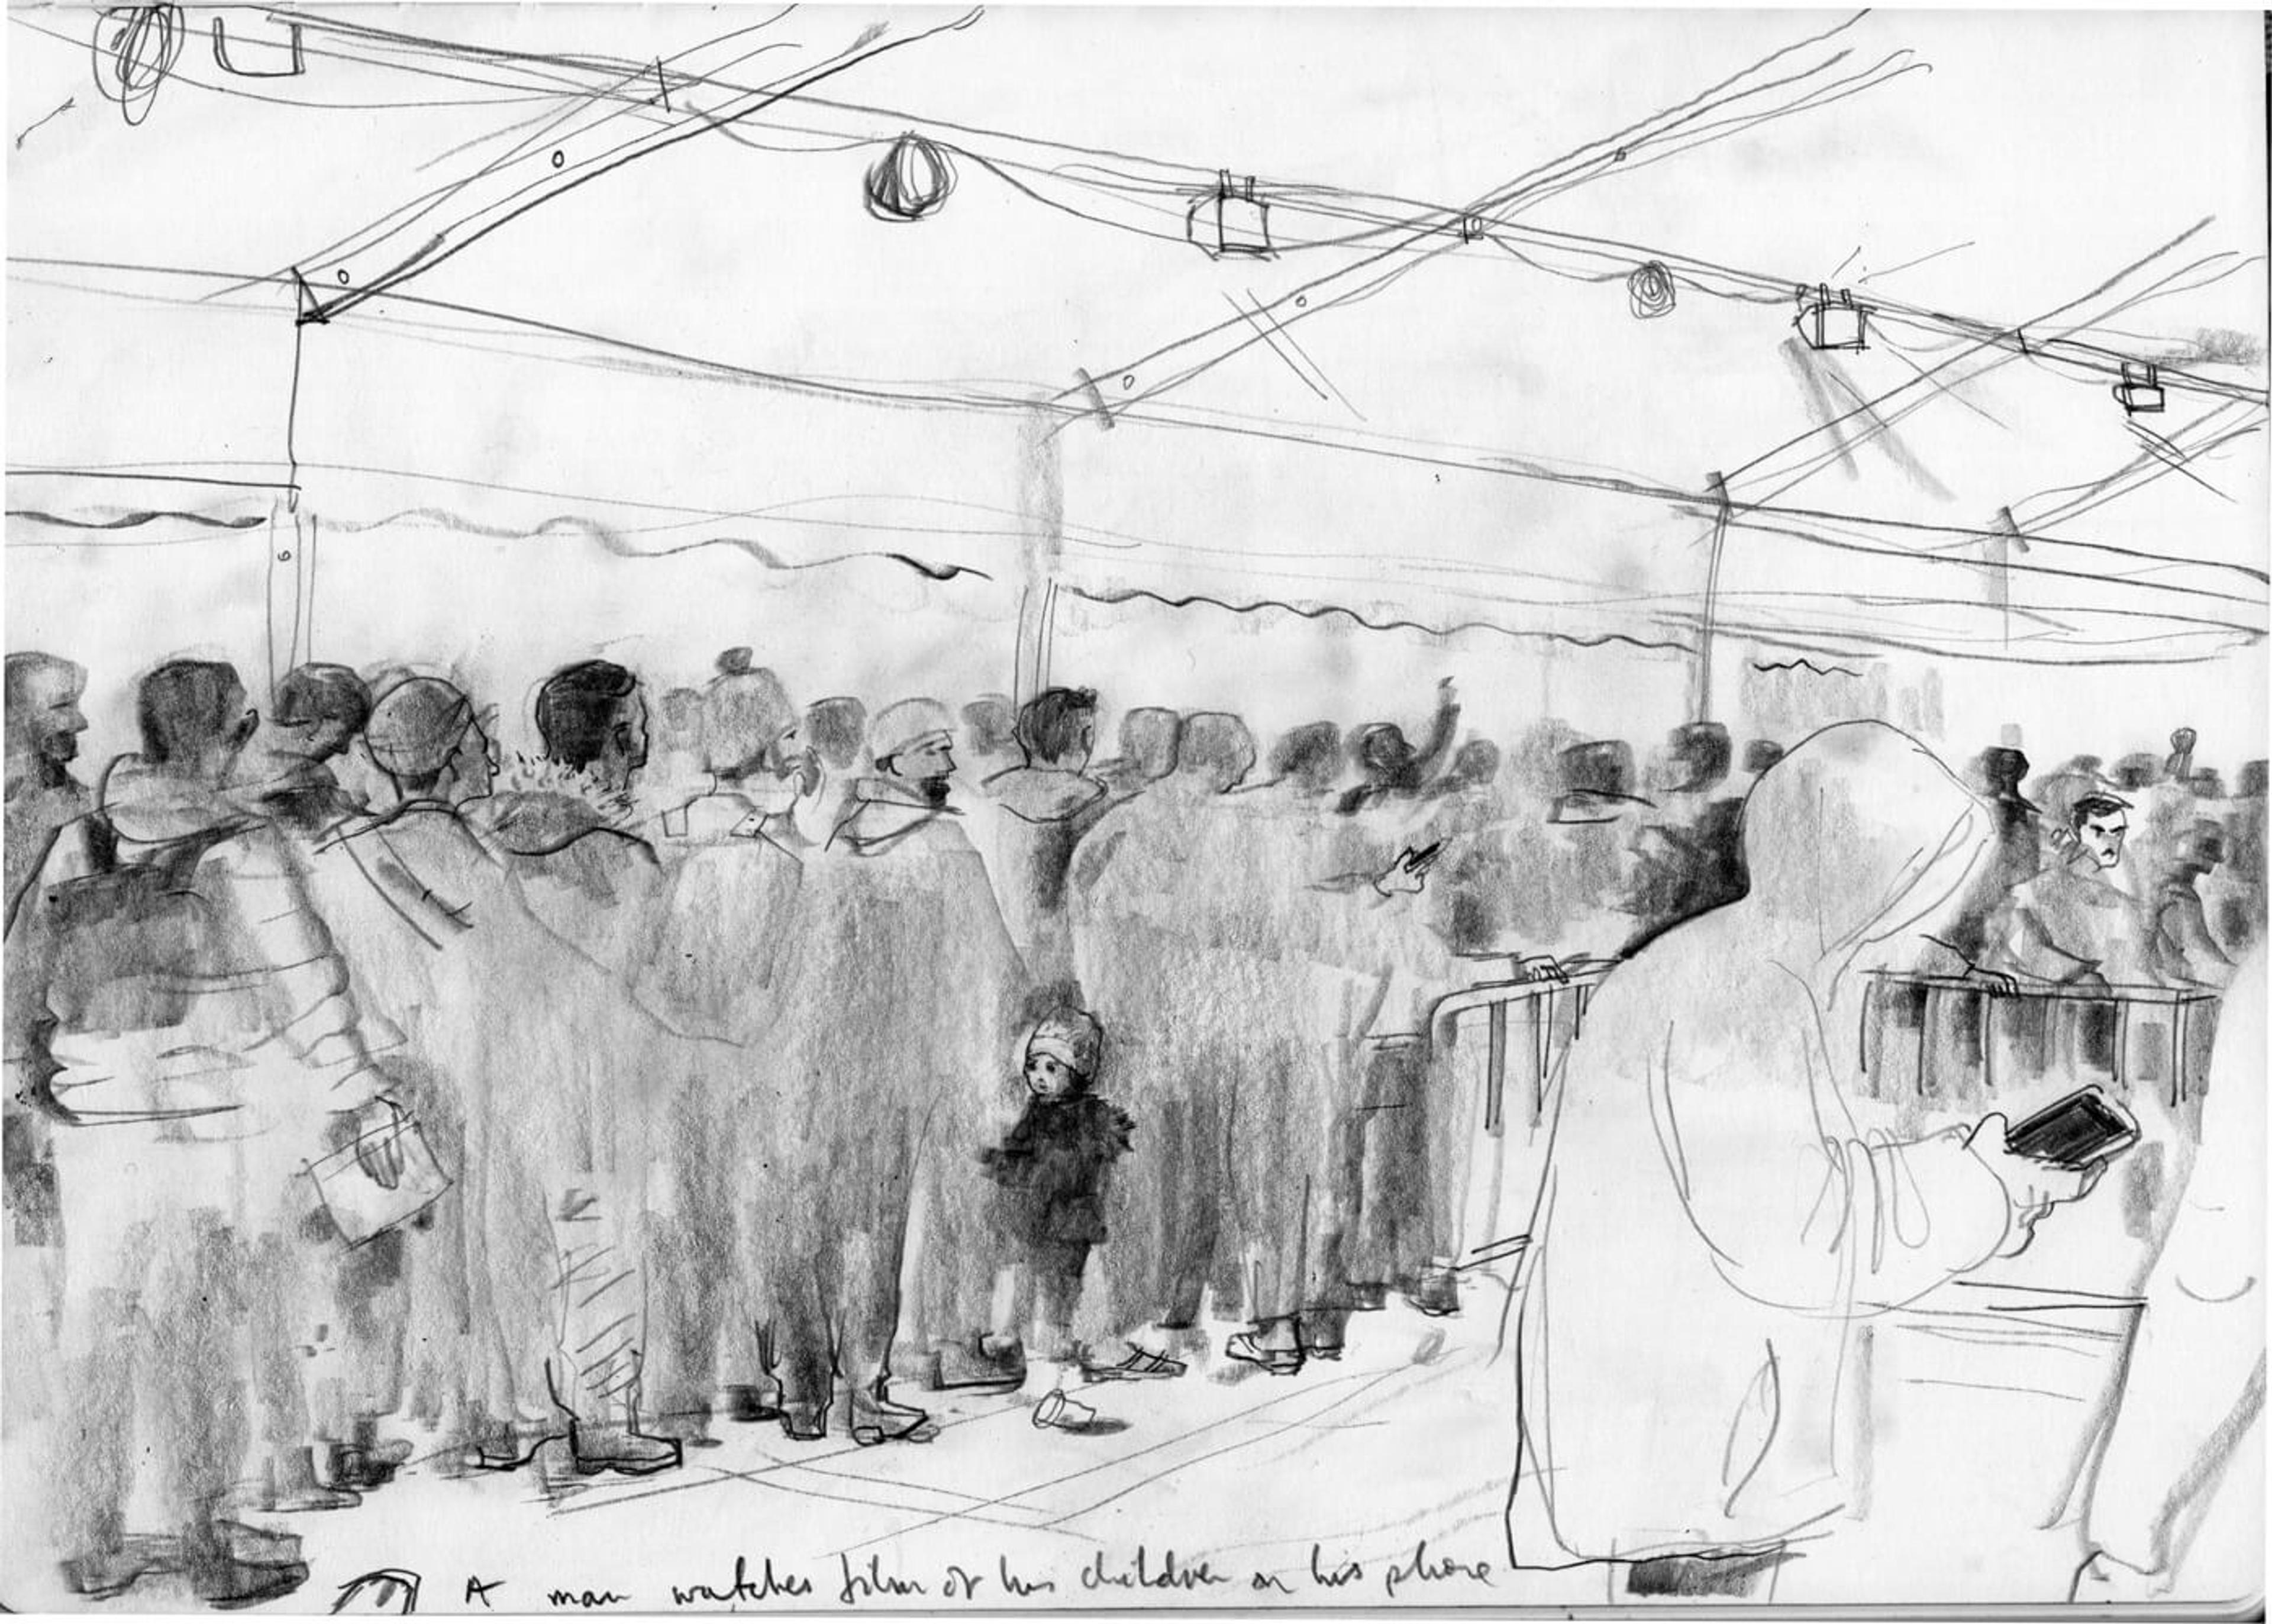 black and white sketch of refugees standing in line